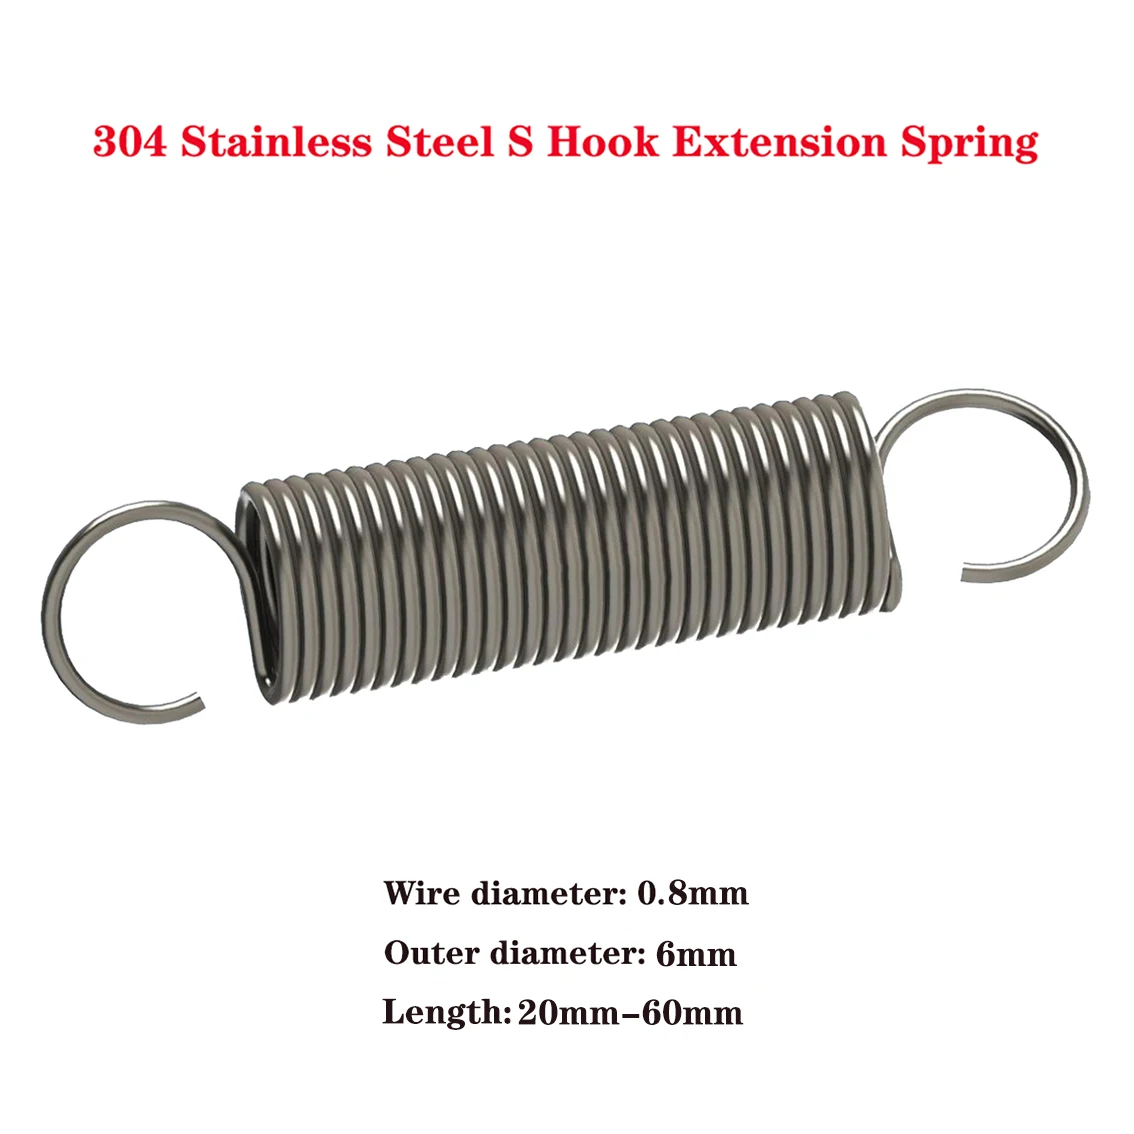 

5Pcs Wire Dia 0.8mm S Hook Extension Spring OD 6mm 304 Stainless Cylindroid Helical Pullback Tension Coil Spring Length 20-60mm